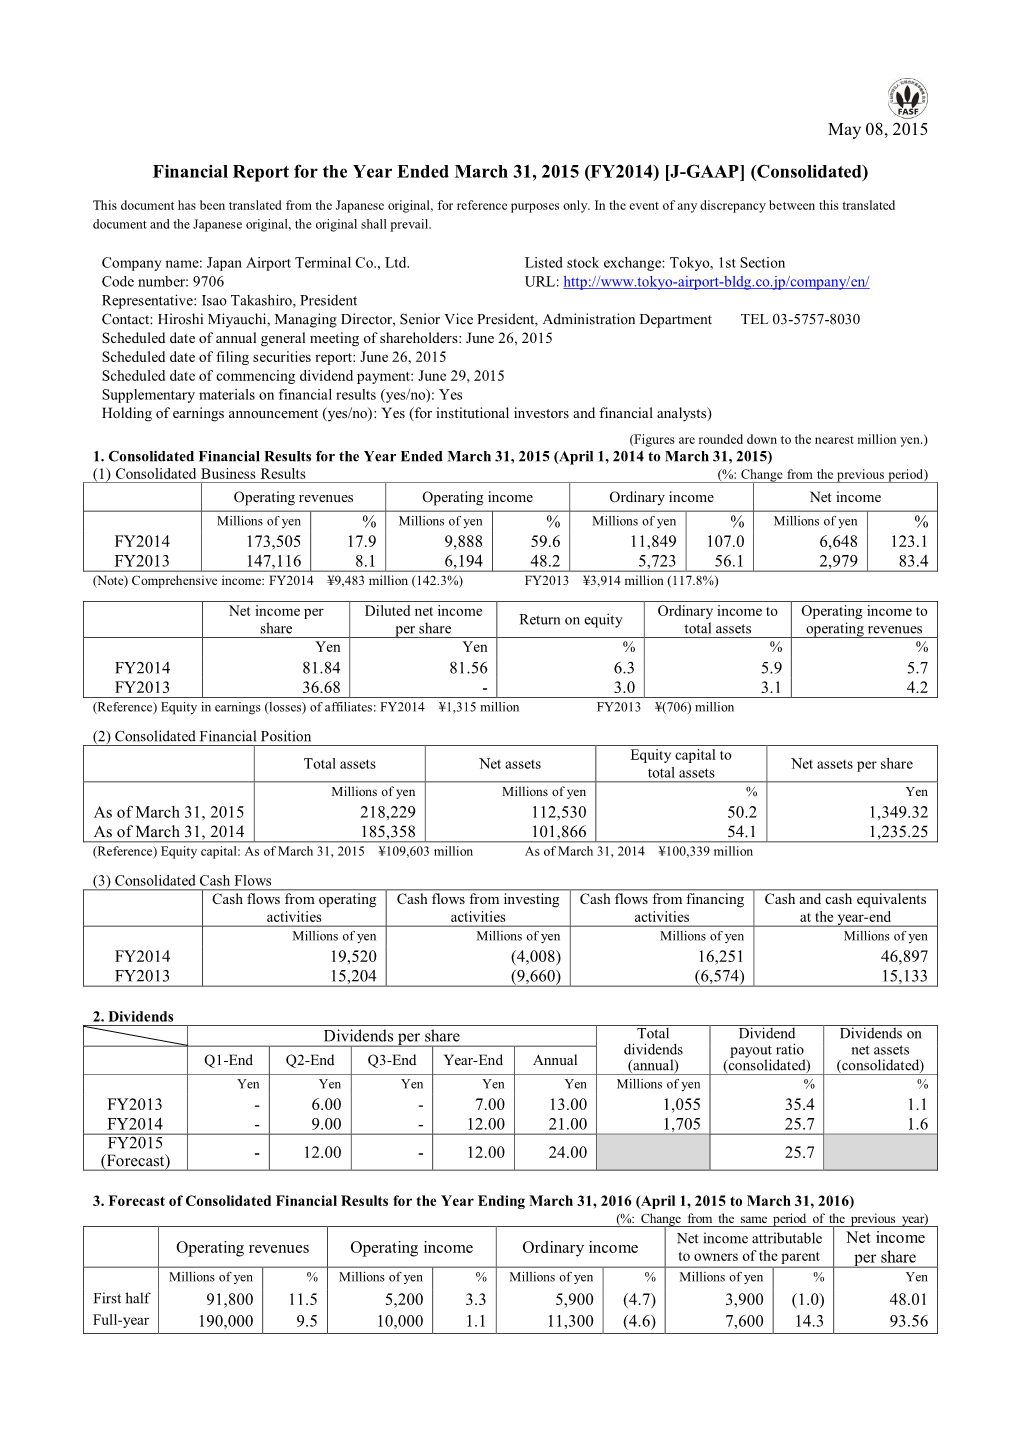 Financial Report for the Year Ended March 31, 2015 (FY2014) [J-GAAP] (Consolidated)